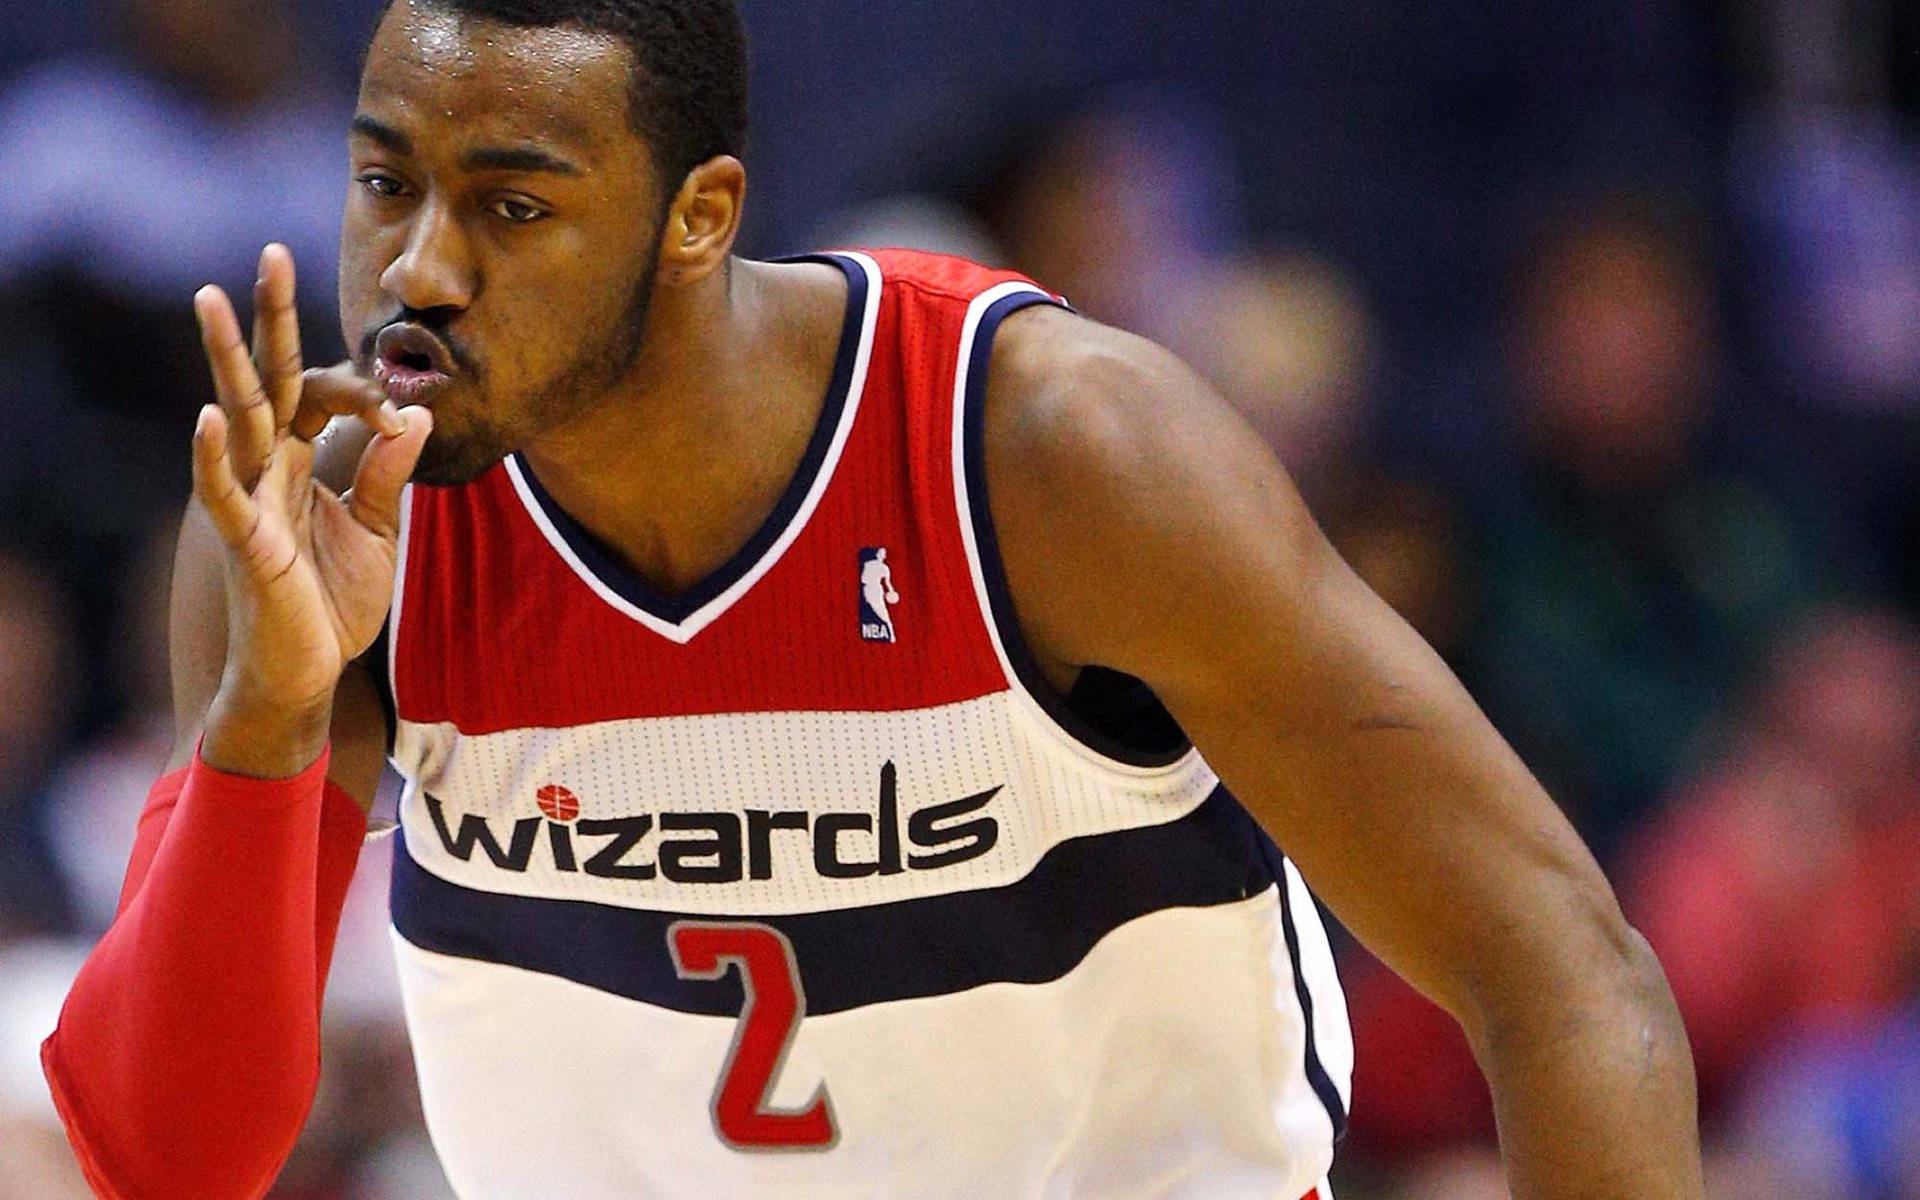 John Wall Making A Three-point Sign Background